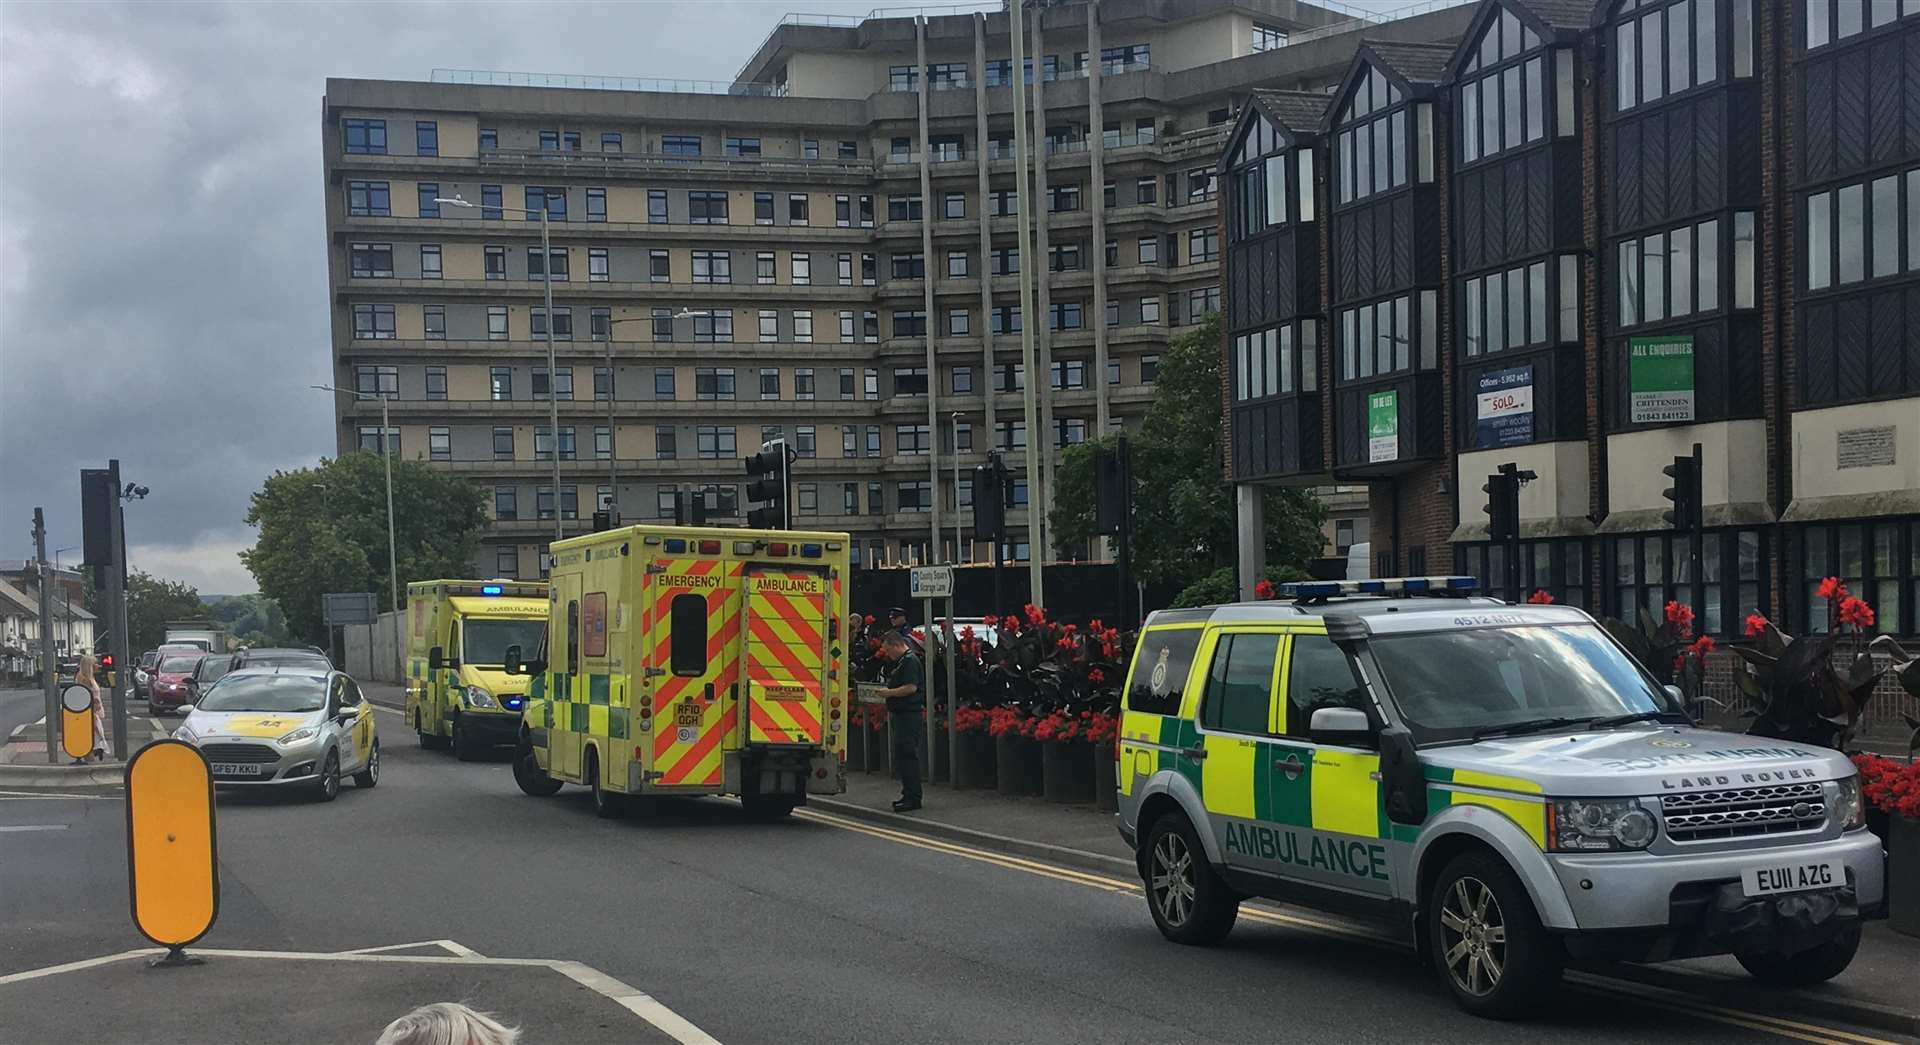 A police car, two ambulances and a paramedic vehicle attended the scene